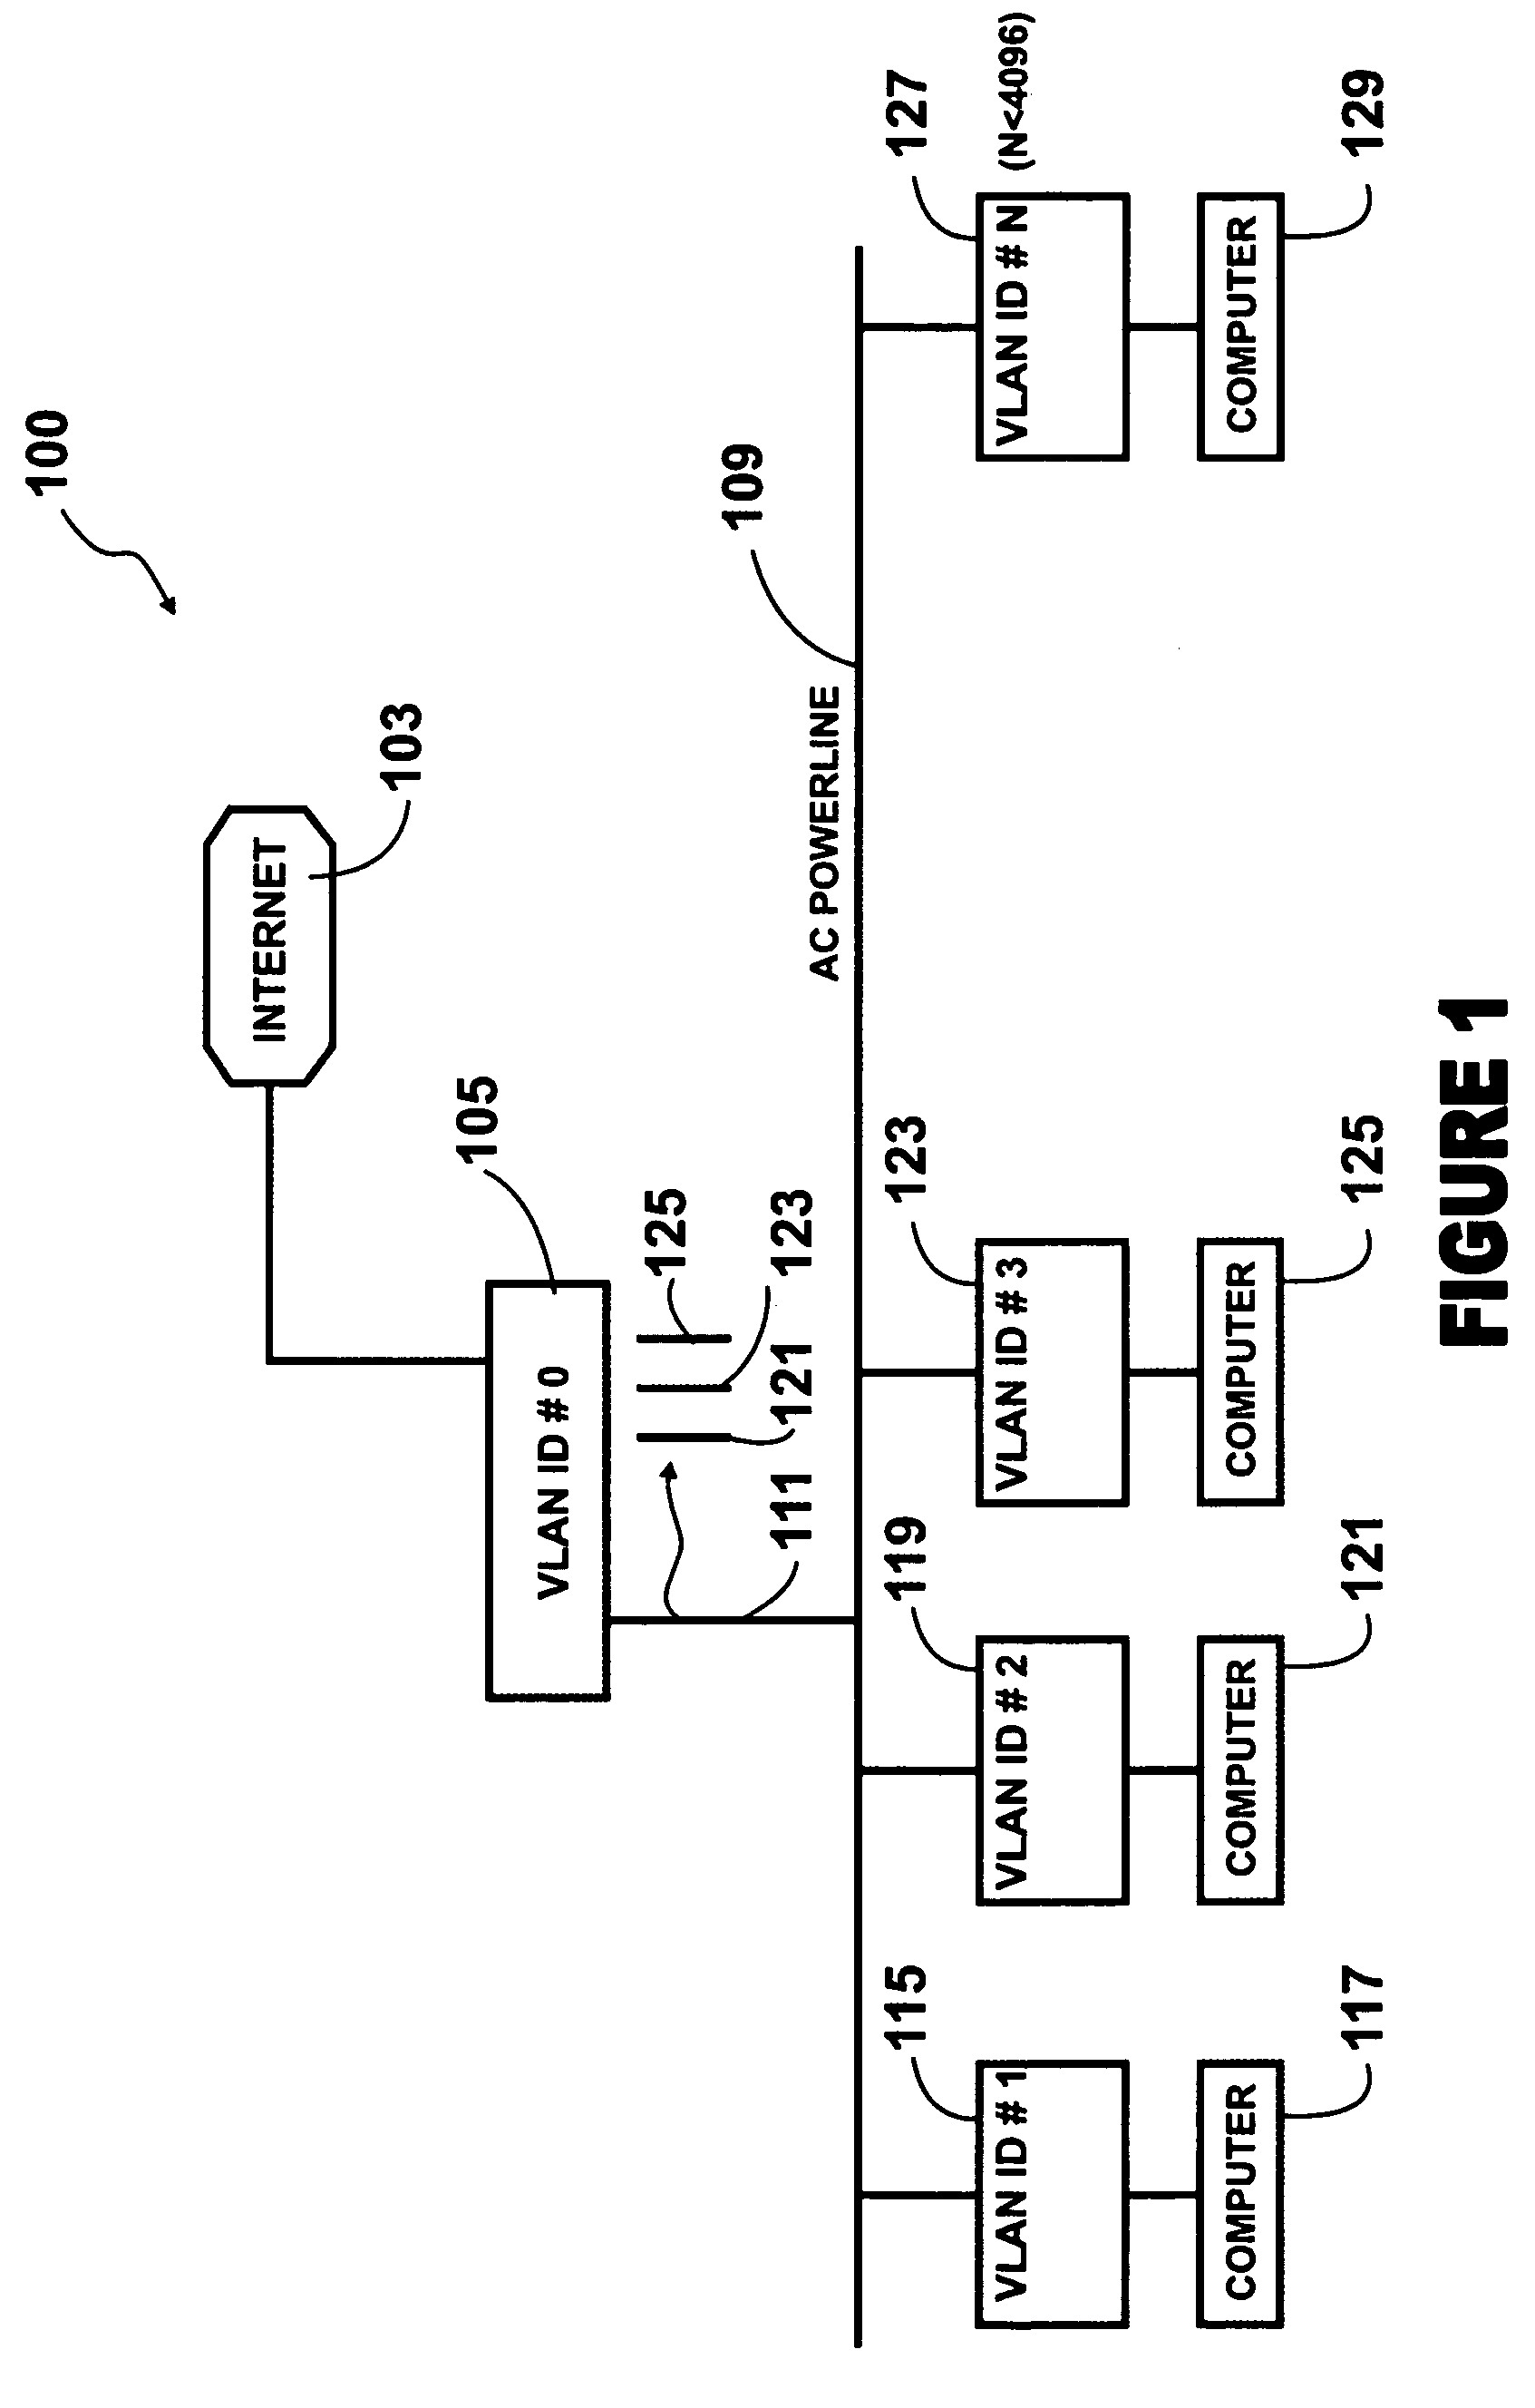 Internal powerline power supply method and system